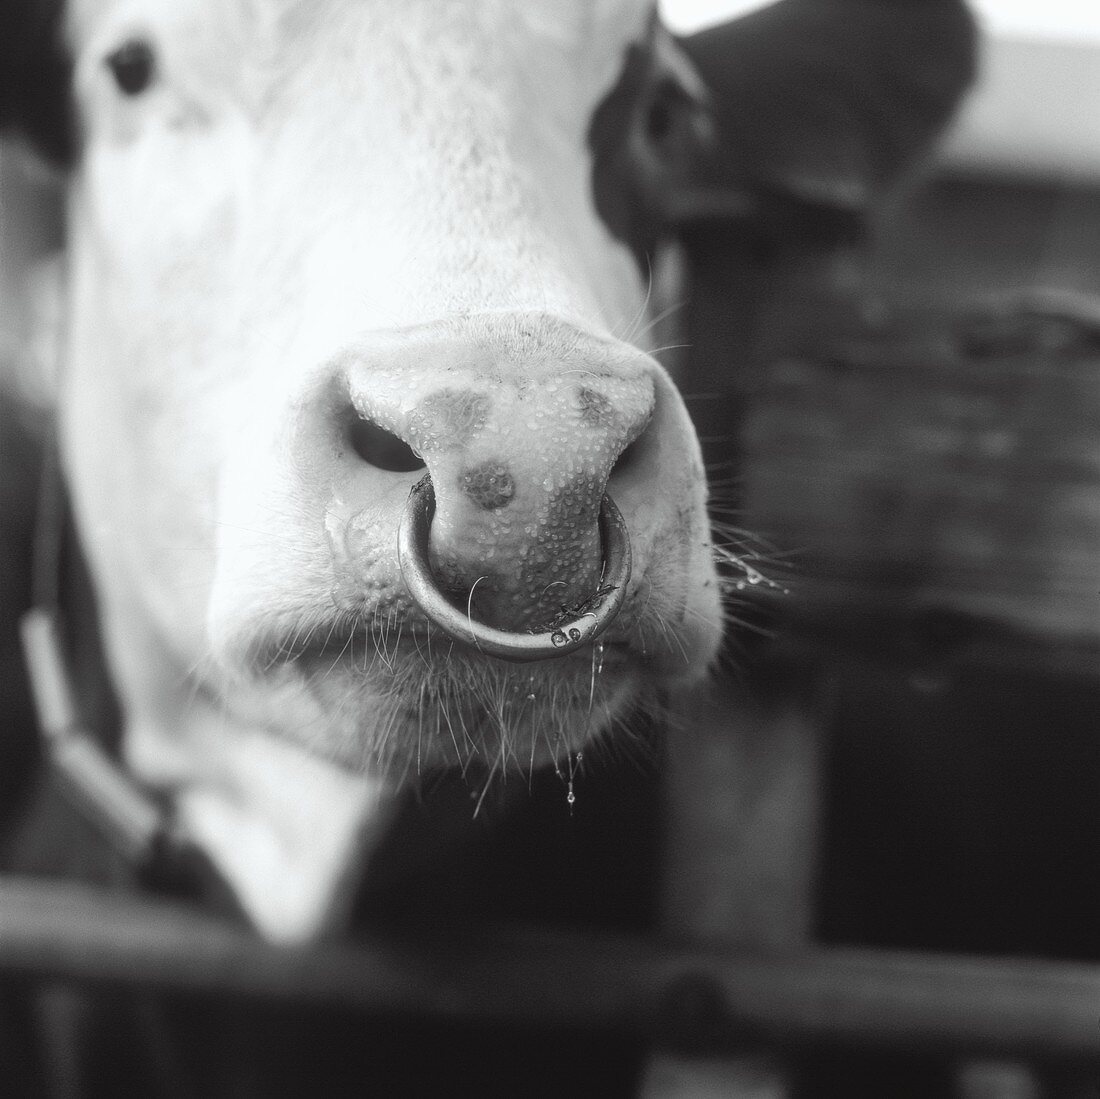 A bull with a nose ring in a stall